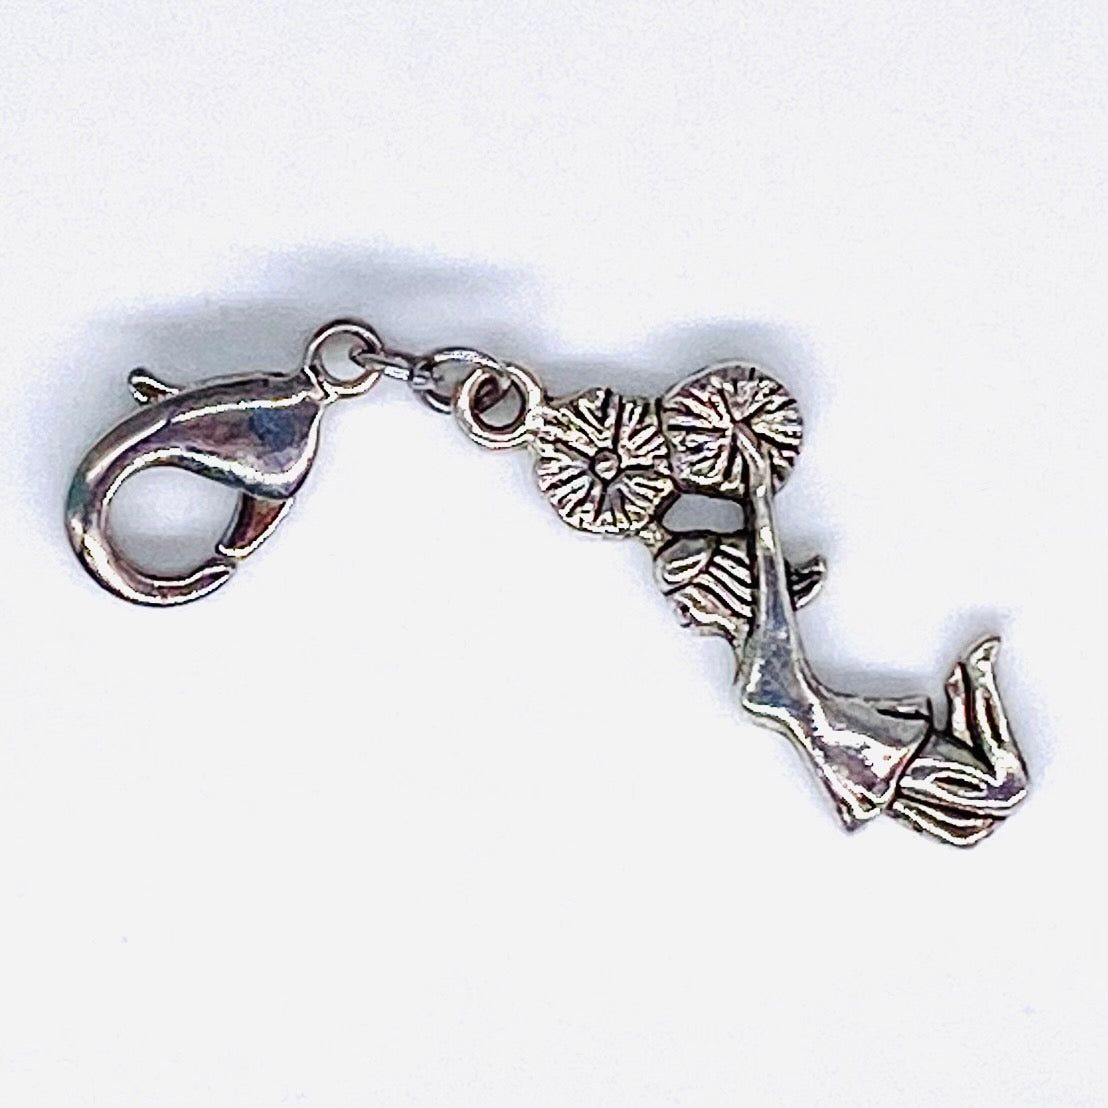 CHEERLEADING CHARMS (ANTIQUED SILVER) 5 PIECES - BEAD LANDING CHARMALONG